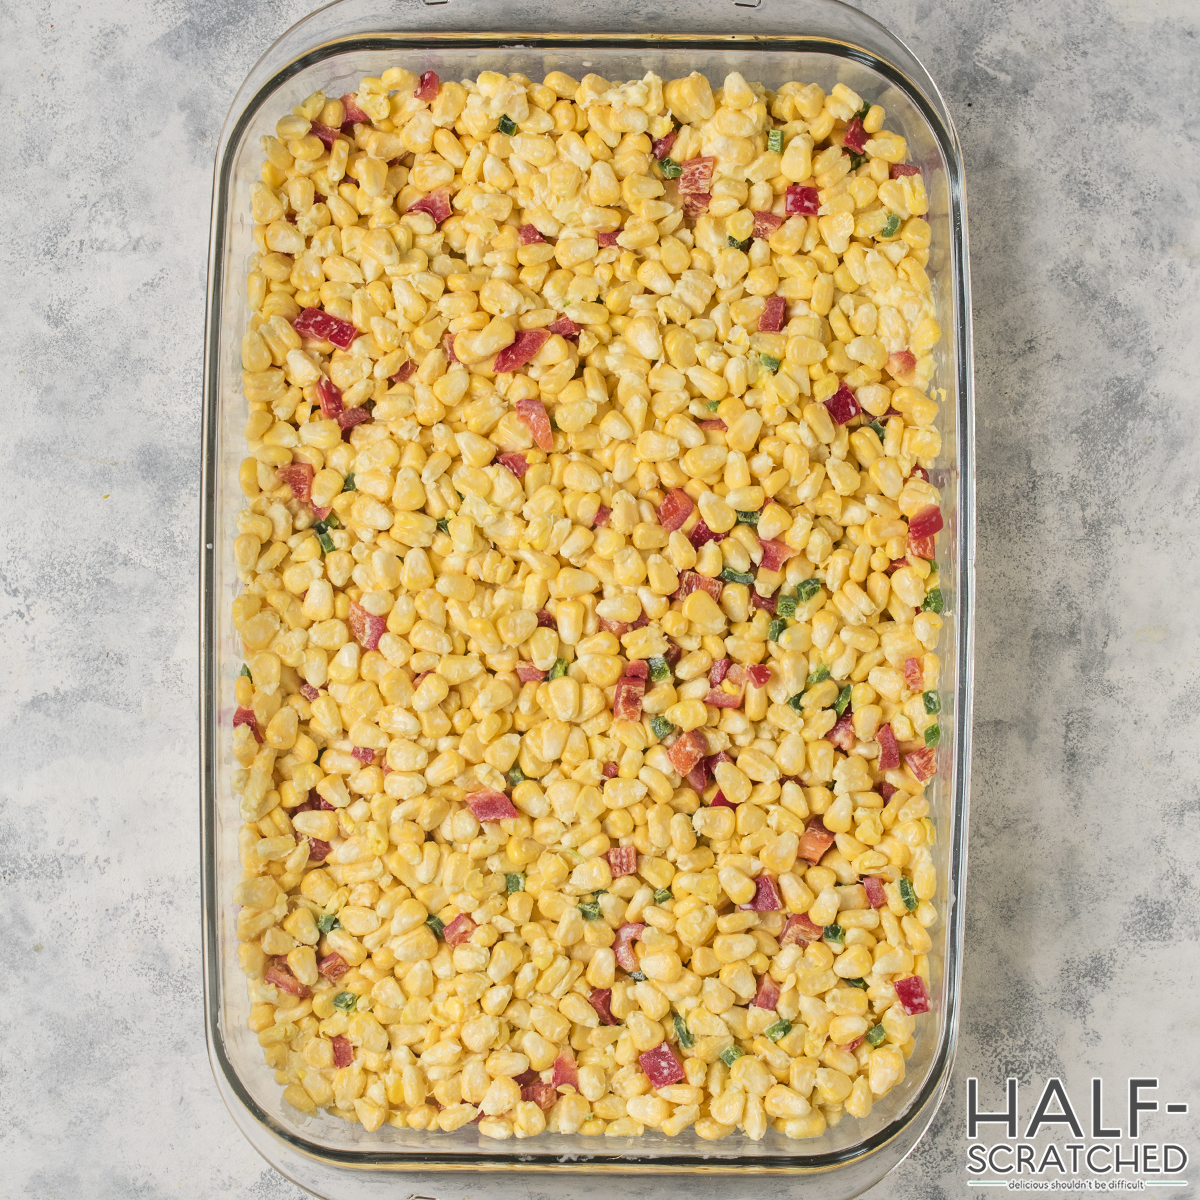 Corn casserole in a 9x13 baking dish with red bell peppers and jalapenos